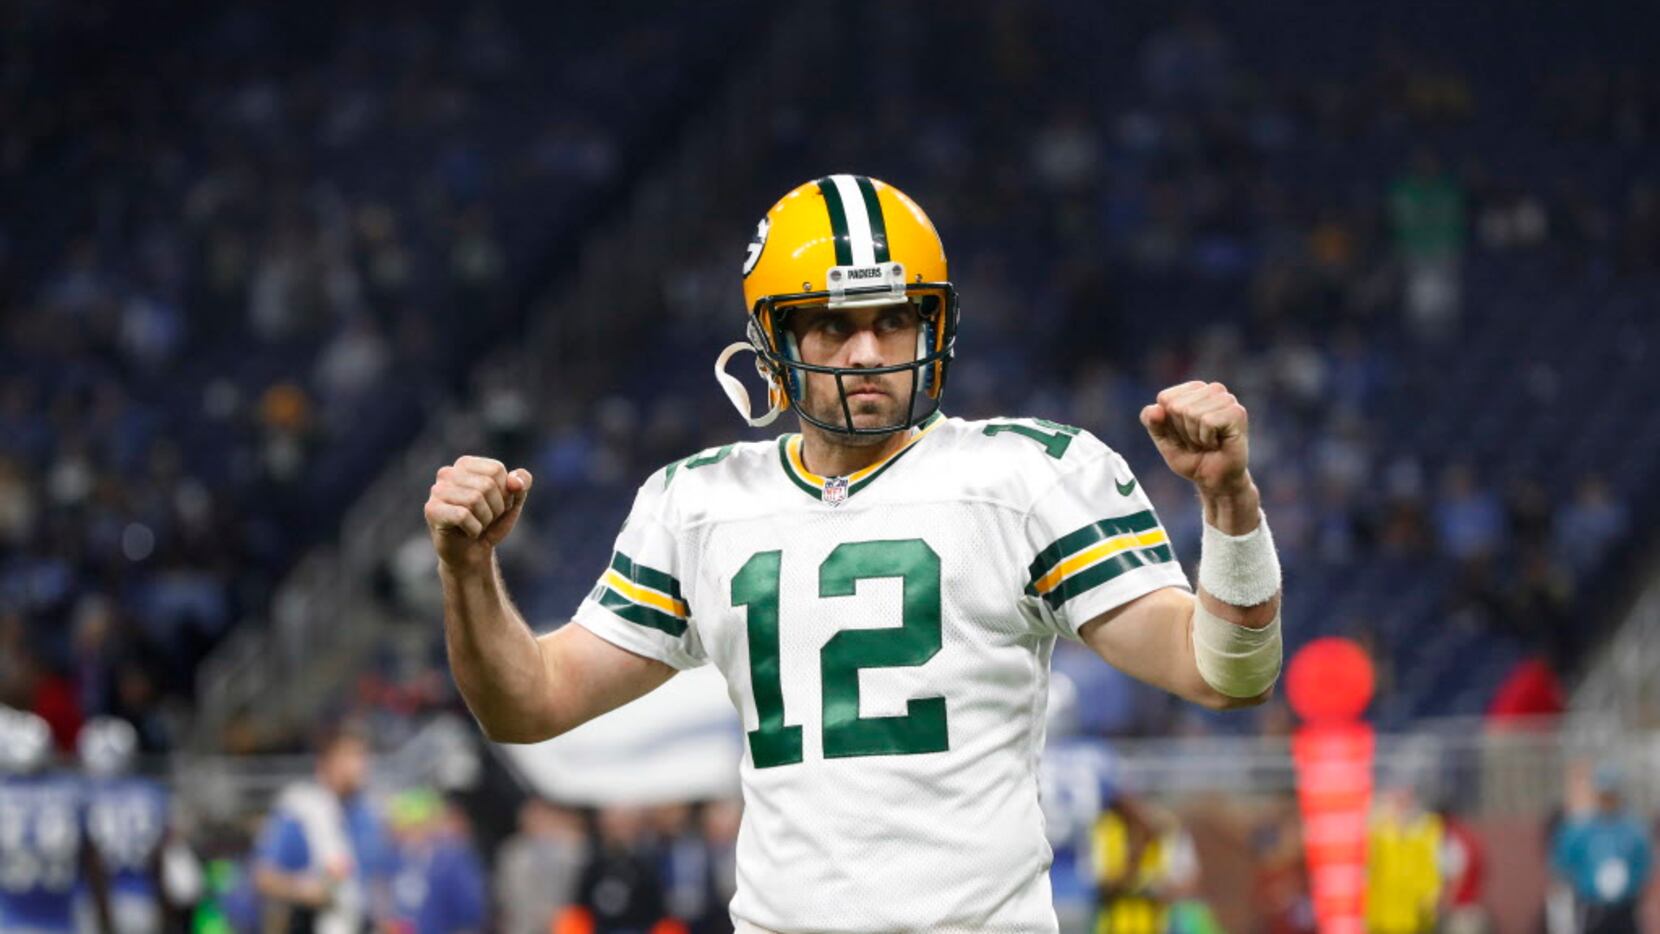 Aaron Rodgers is on a Tom Brady-like roll, but can he play even better?  Packers coach thinks so